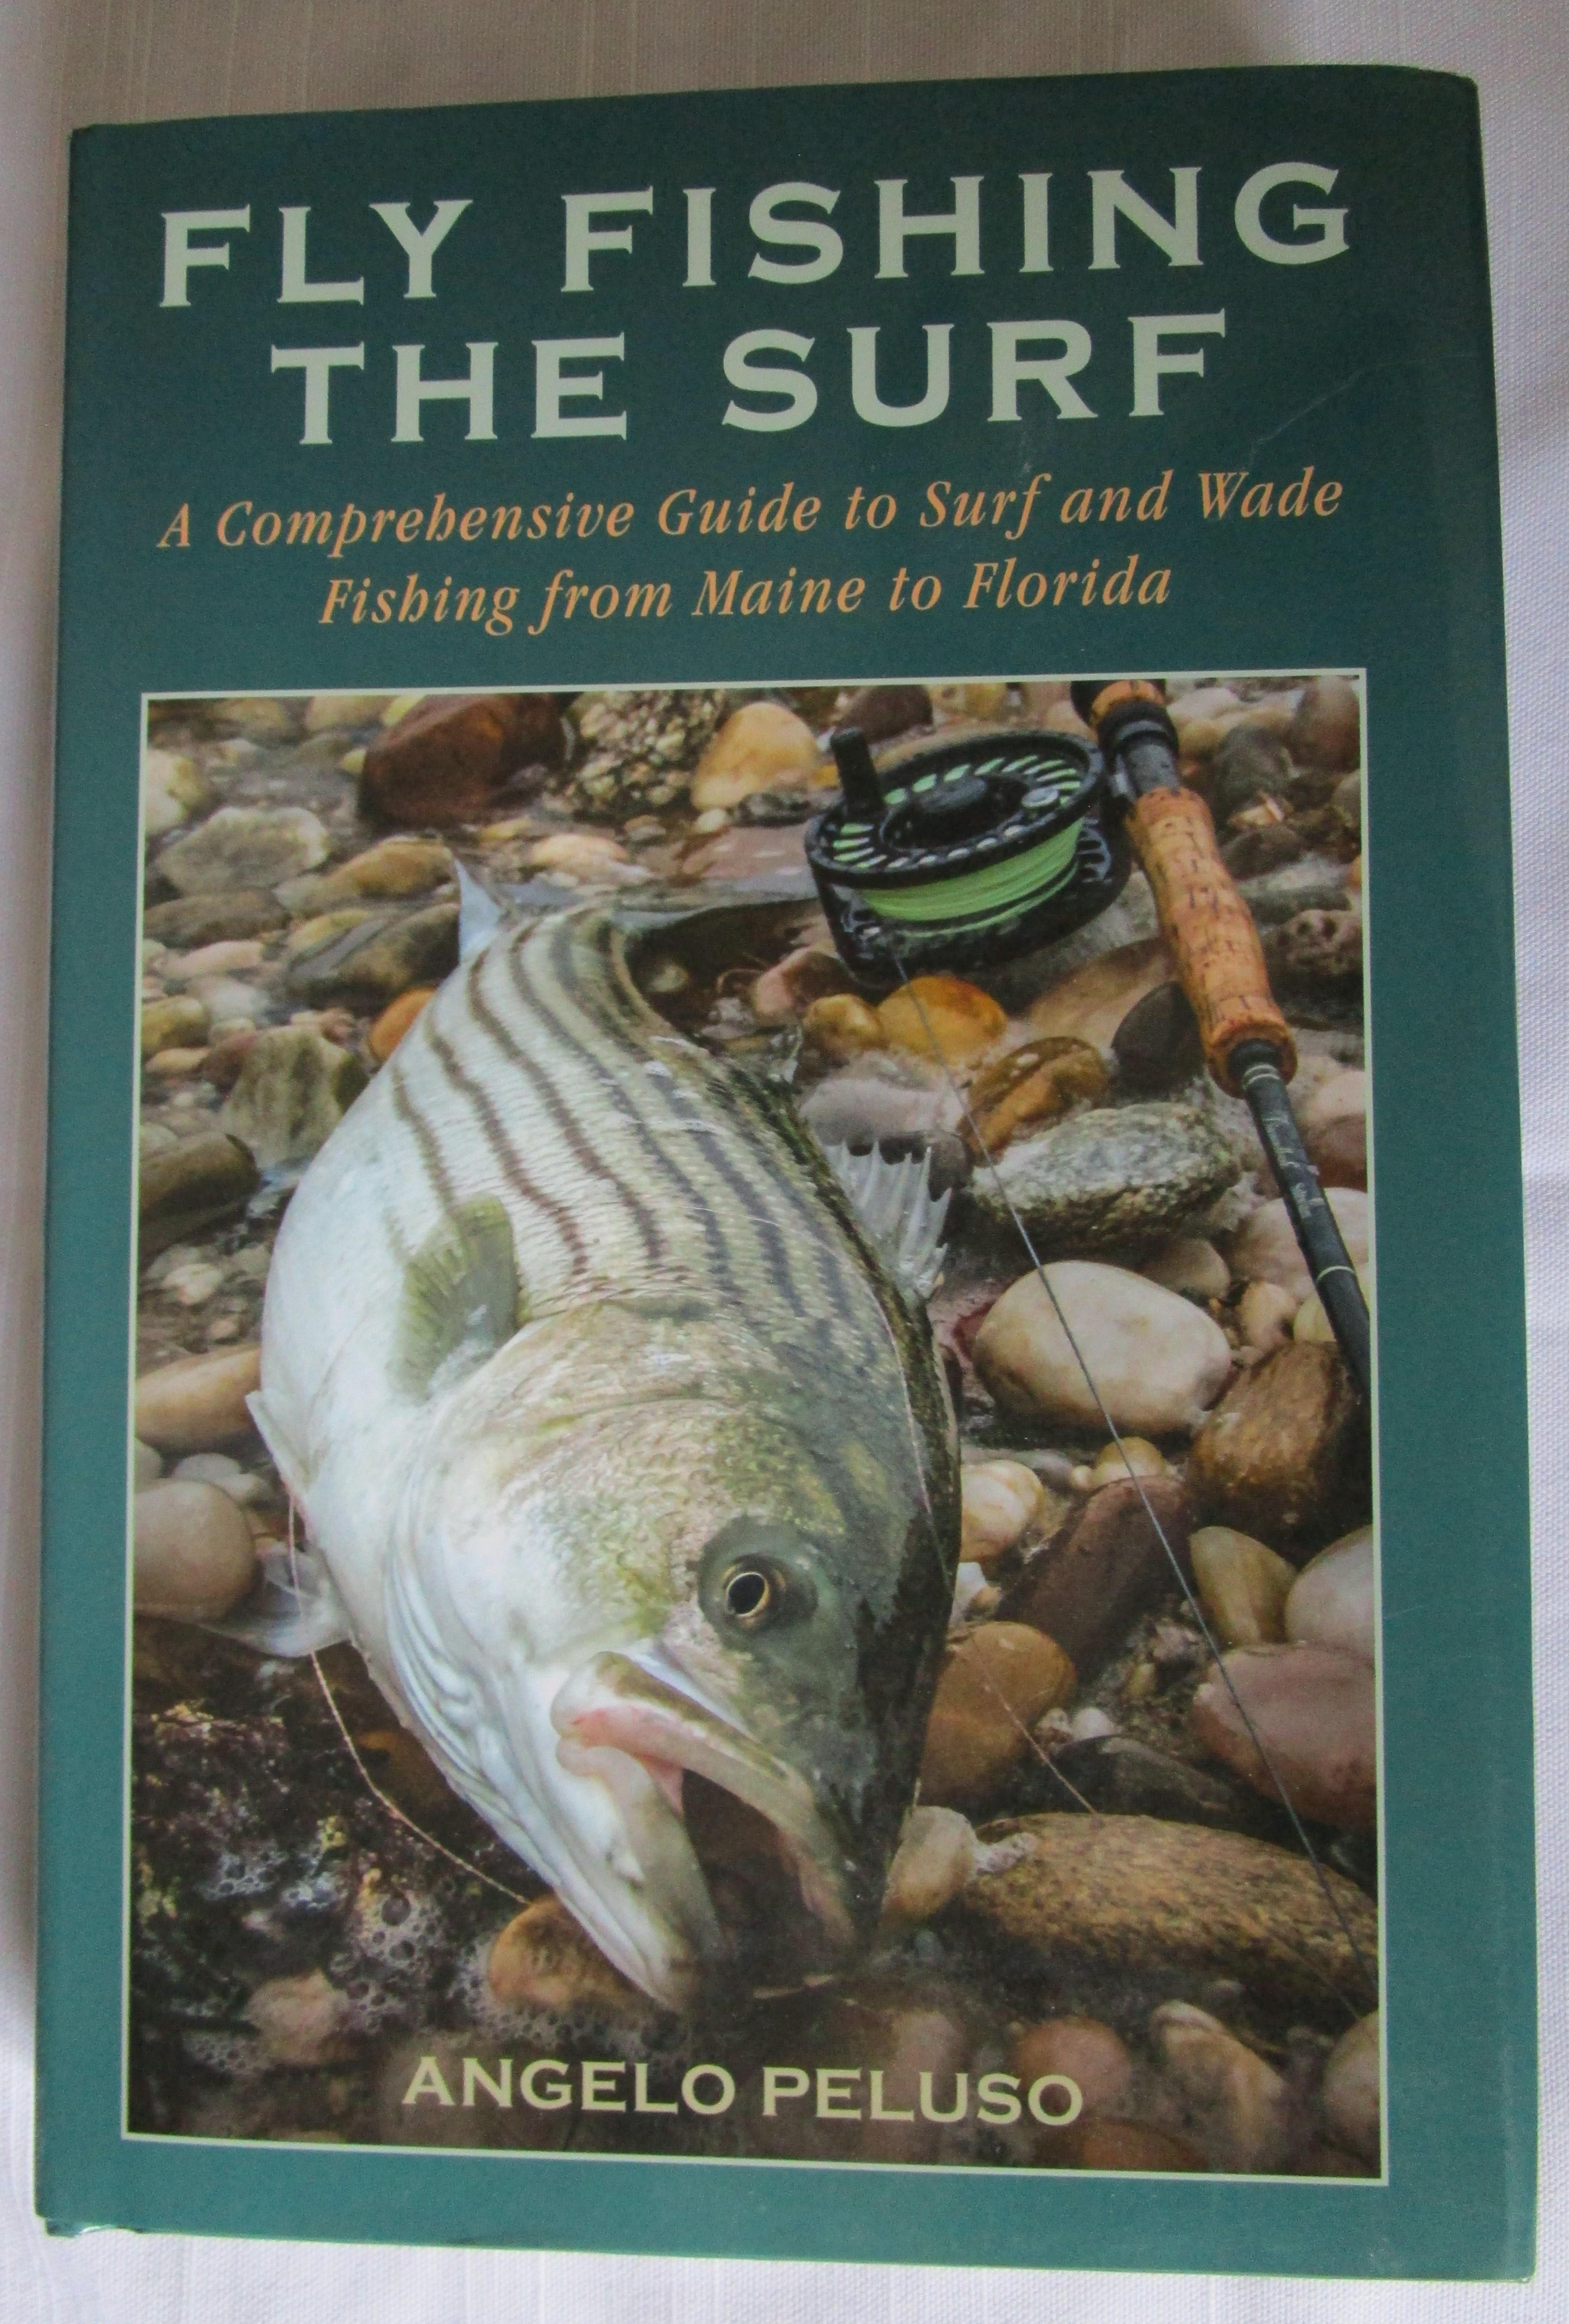 Fly Fishing the Surf: A Comprehensive Guide to Surf and Wade Fishing from Maine to Florida [Book]